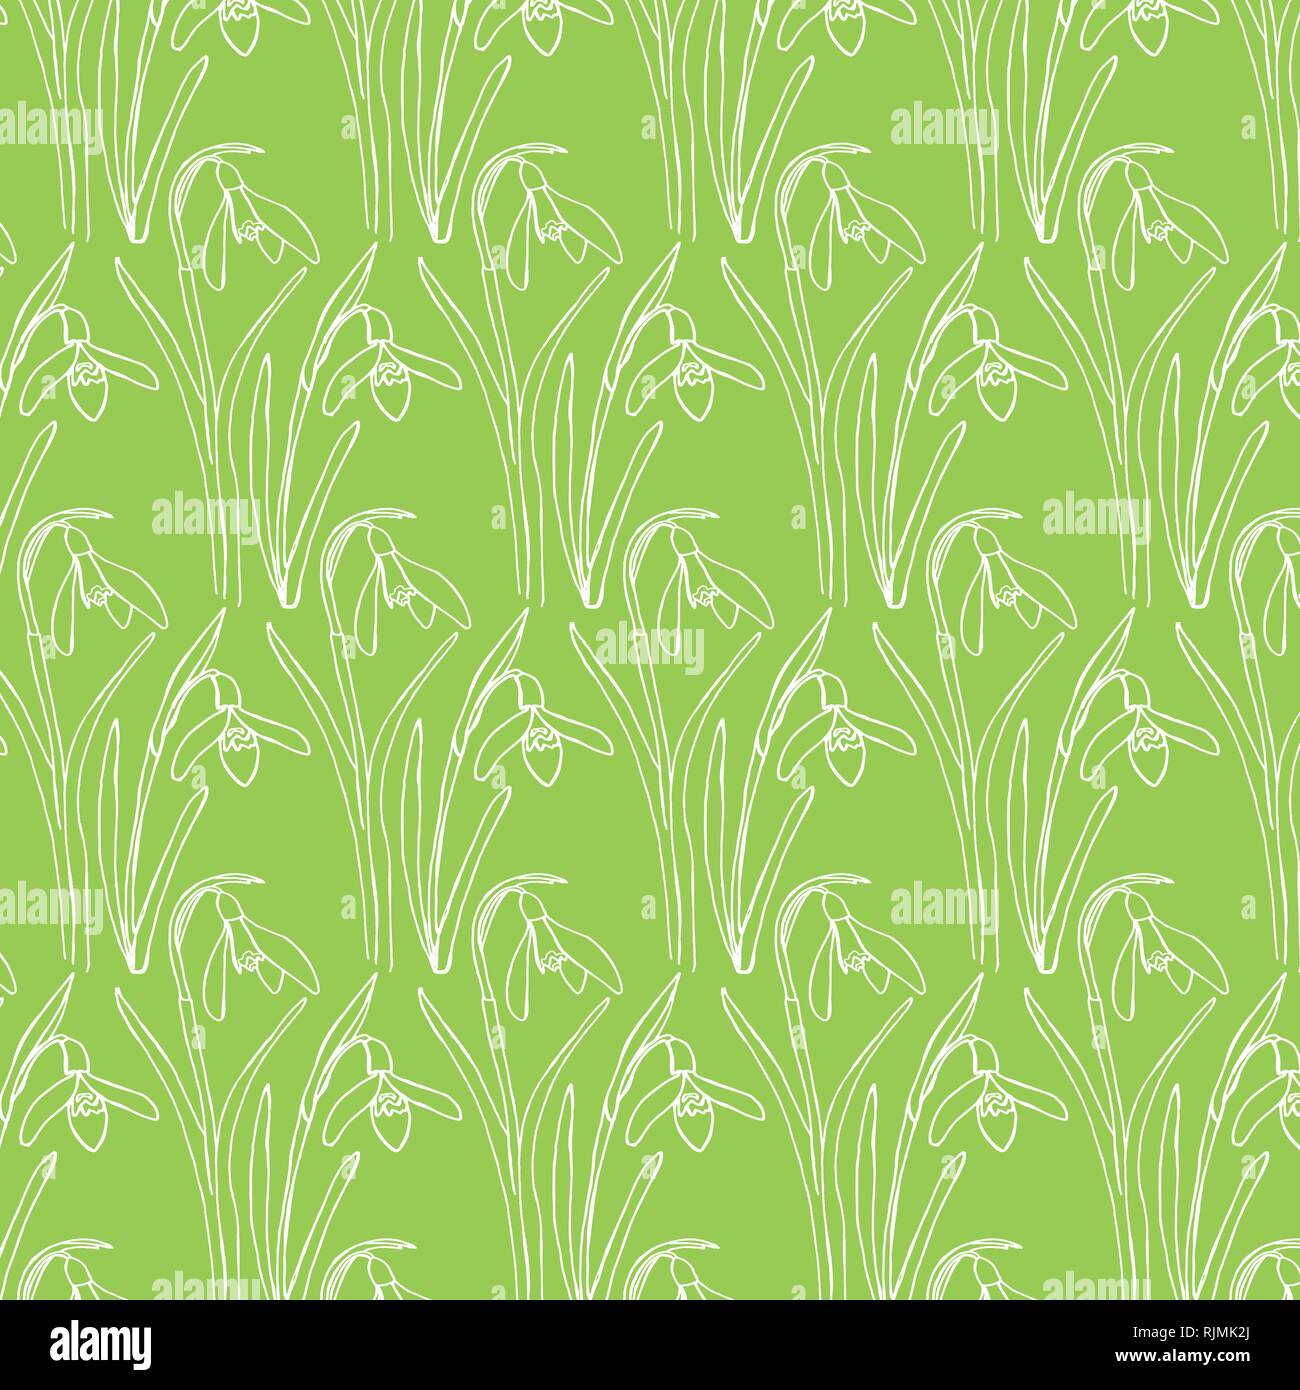 Snow flowers vector pattern on light green background Stock Vector